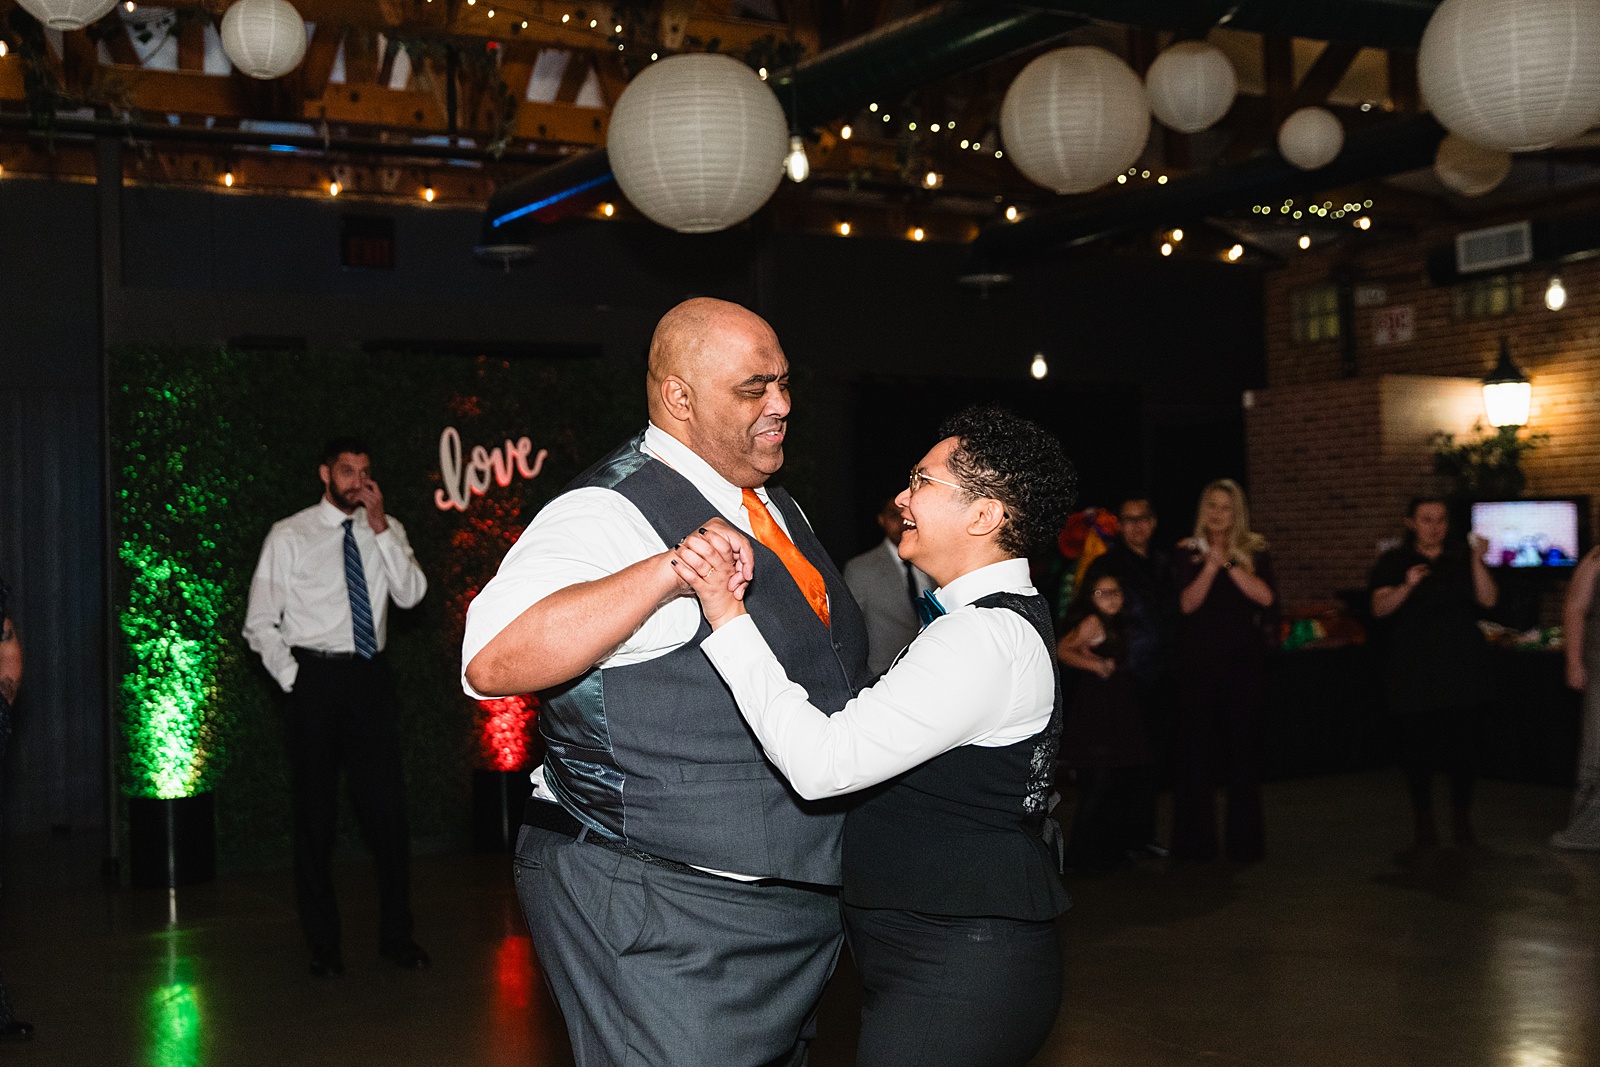 Bride dancing with her father at Regency Garden wedding reception by Mesa wedding photographer Juniper and Co Photography.